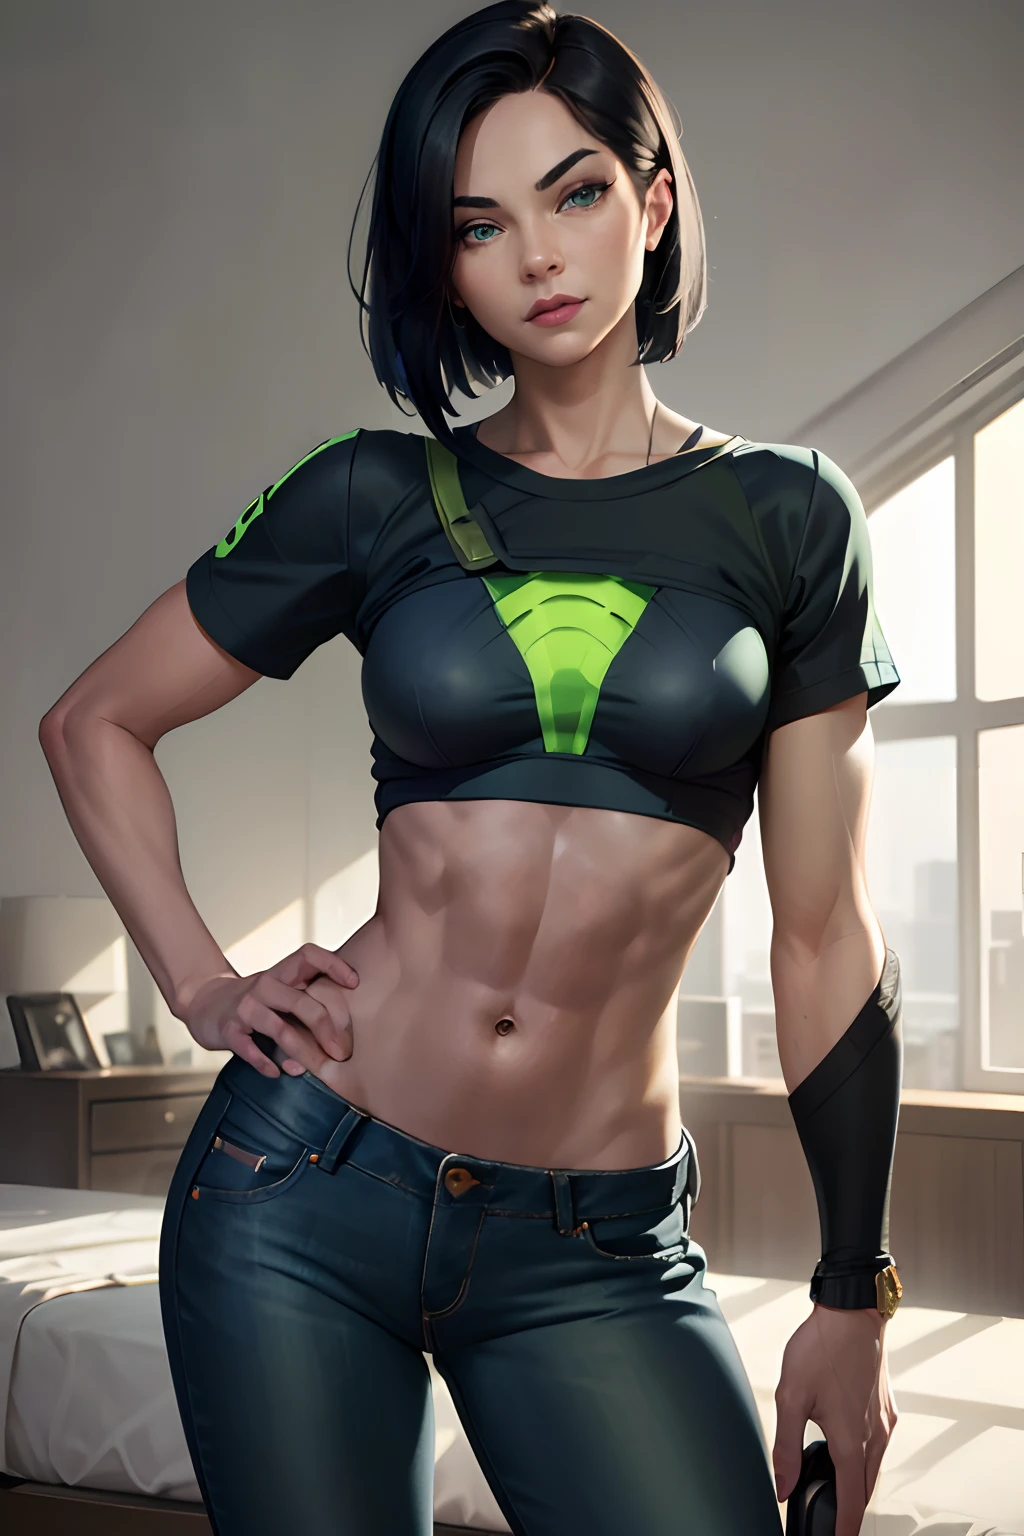 (best quality, masterpiece:1.2), 1 girl, detailed hair, detailed eyes, detailed lips, valorantViper, green eyes, glowing eyes, small mouth, small breasts, [abs:0.4], t-shirt, showing abs, jeans, bedroom, looking at viewer, glare, smirking, left hand to hips, no weapon, realistic colors, studio lighting, no mask, black background